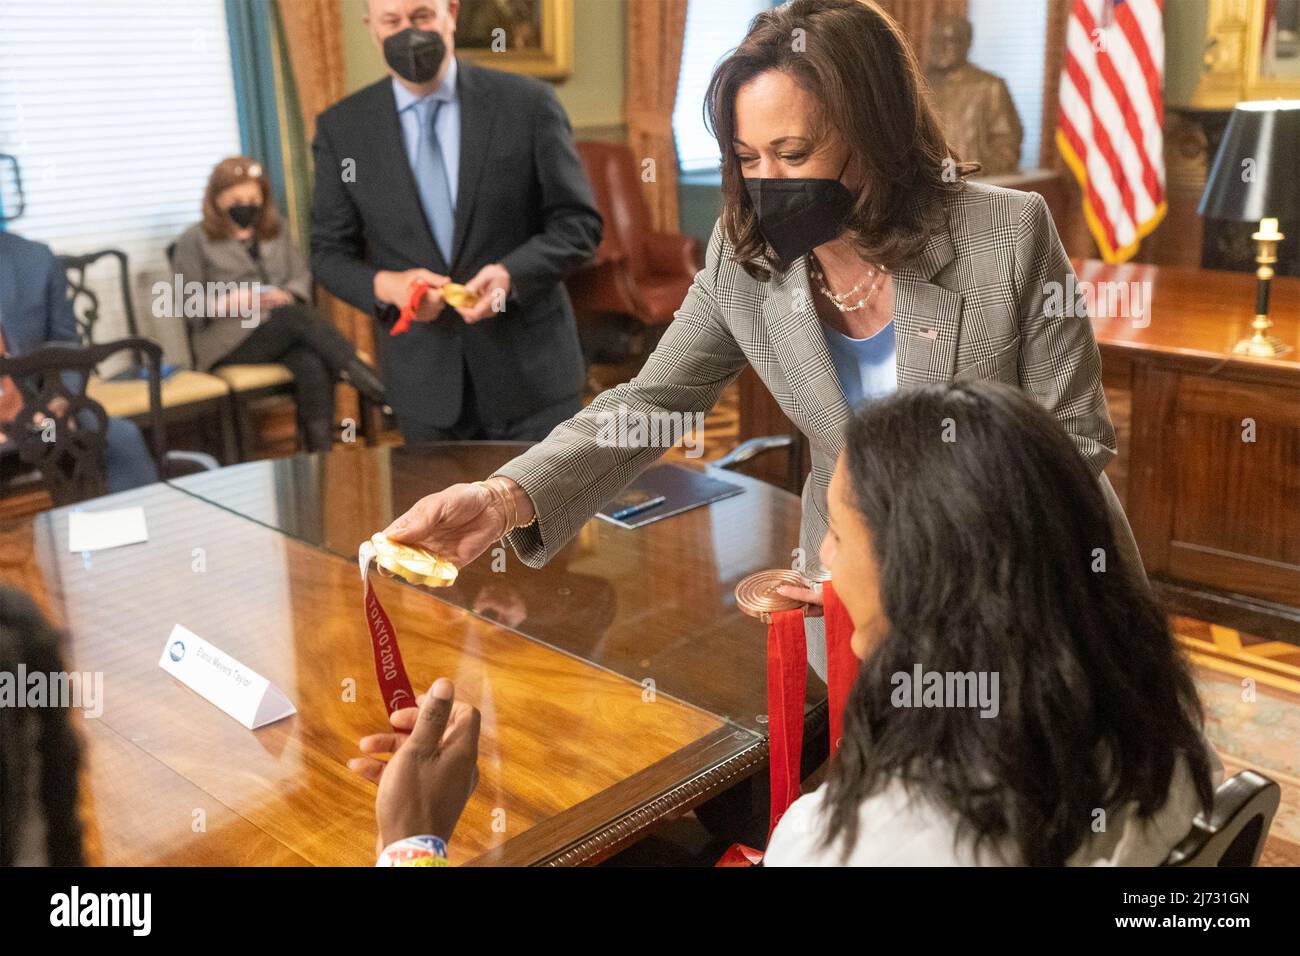 Washington, United States of America. 04 May, 2022. U.S Vice President Kamala Harris, center, views the gold medal of Olympia bobsled medalist before an event welcoming the athletes that participated in the Tokyo 2020 Summer Olympic and Paralympics, Beijing 2022 Winter Olympic and Paralympics, at the White House May 4, 2022 in Washington, D.C.  Credit: Lawrence Jackson/White House Photo/Alamy Live News Stock Photo